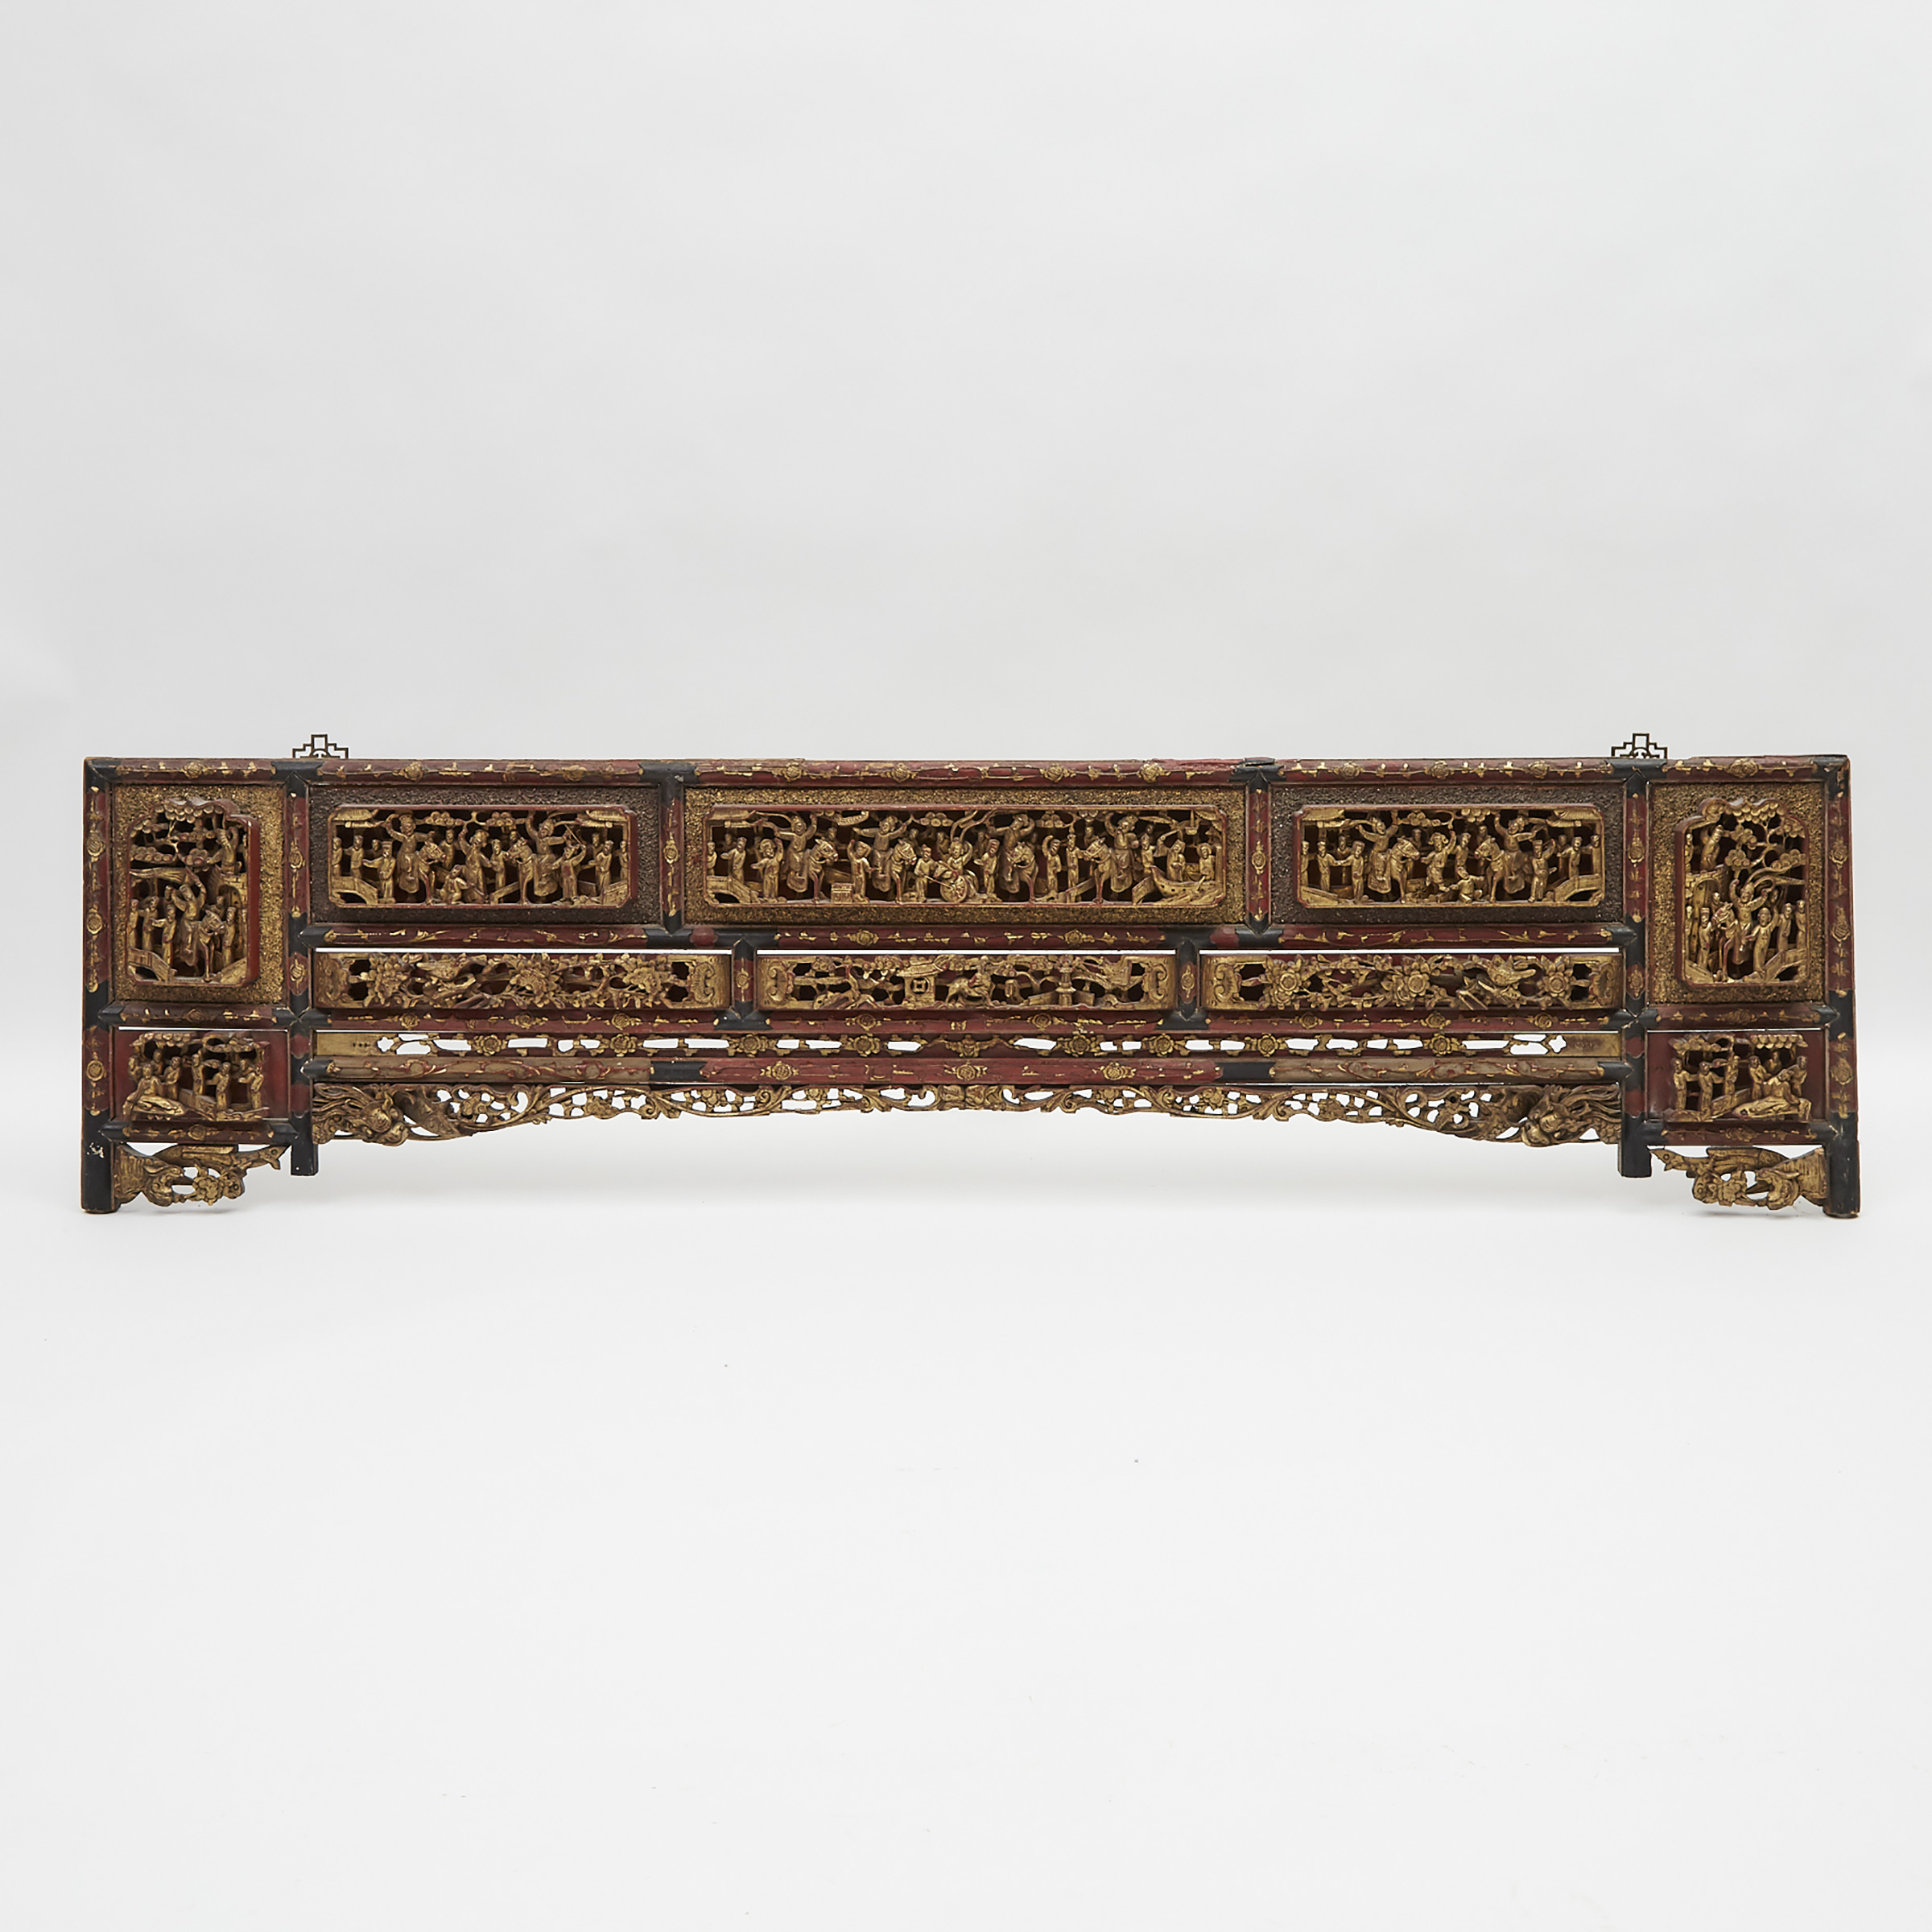 A Large Gilt Lacquered Figural Headboard, 19th Century